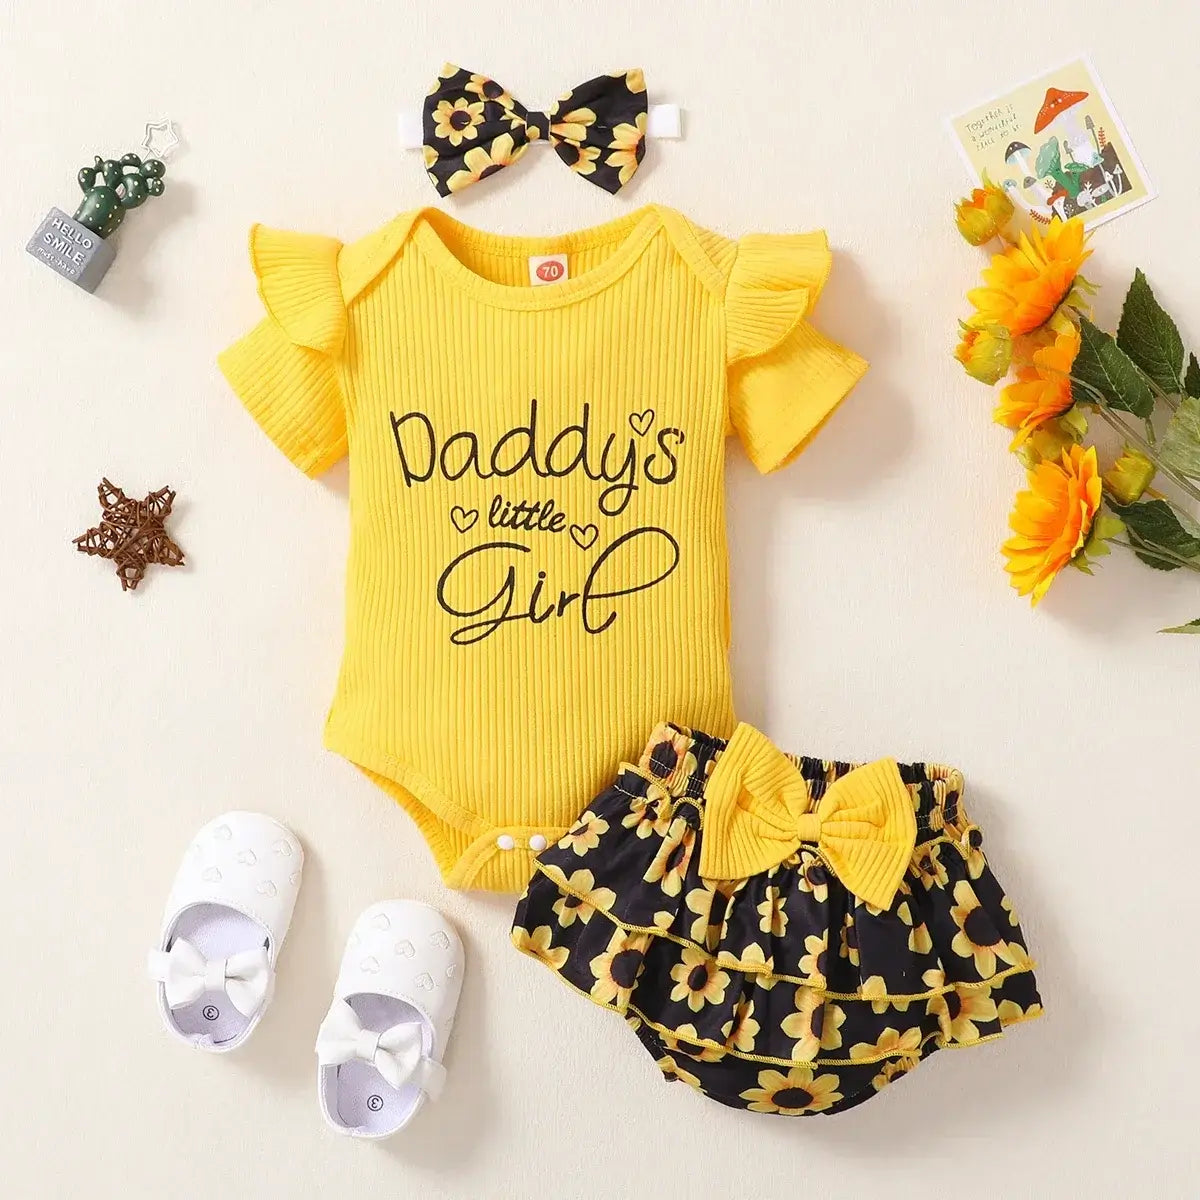 Image of Adorable 3pcs Newborn Baby Girl Jumpsuit Set with Floral Pattern and Cotton Comfort. Shop now at OleOle.